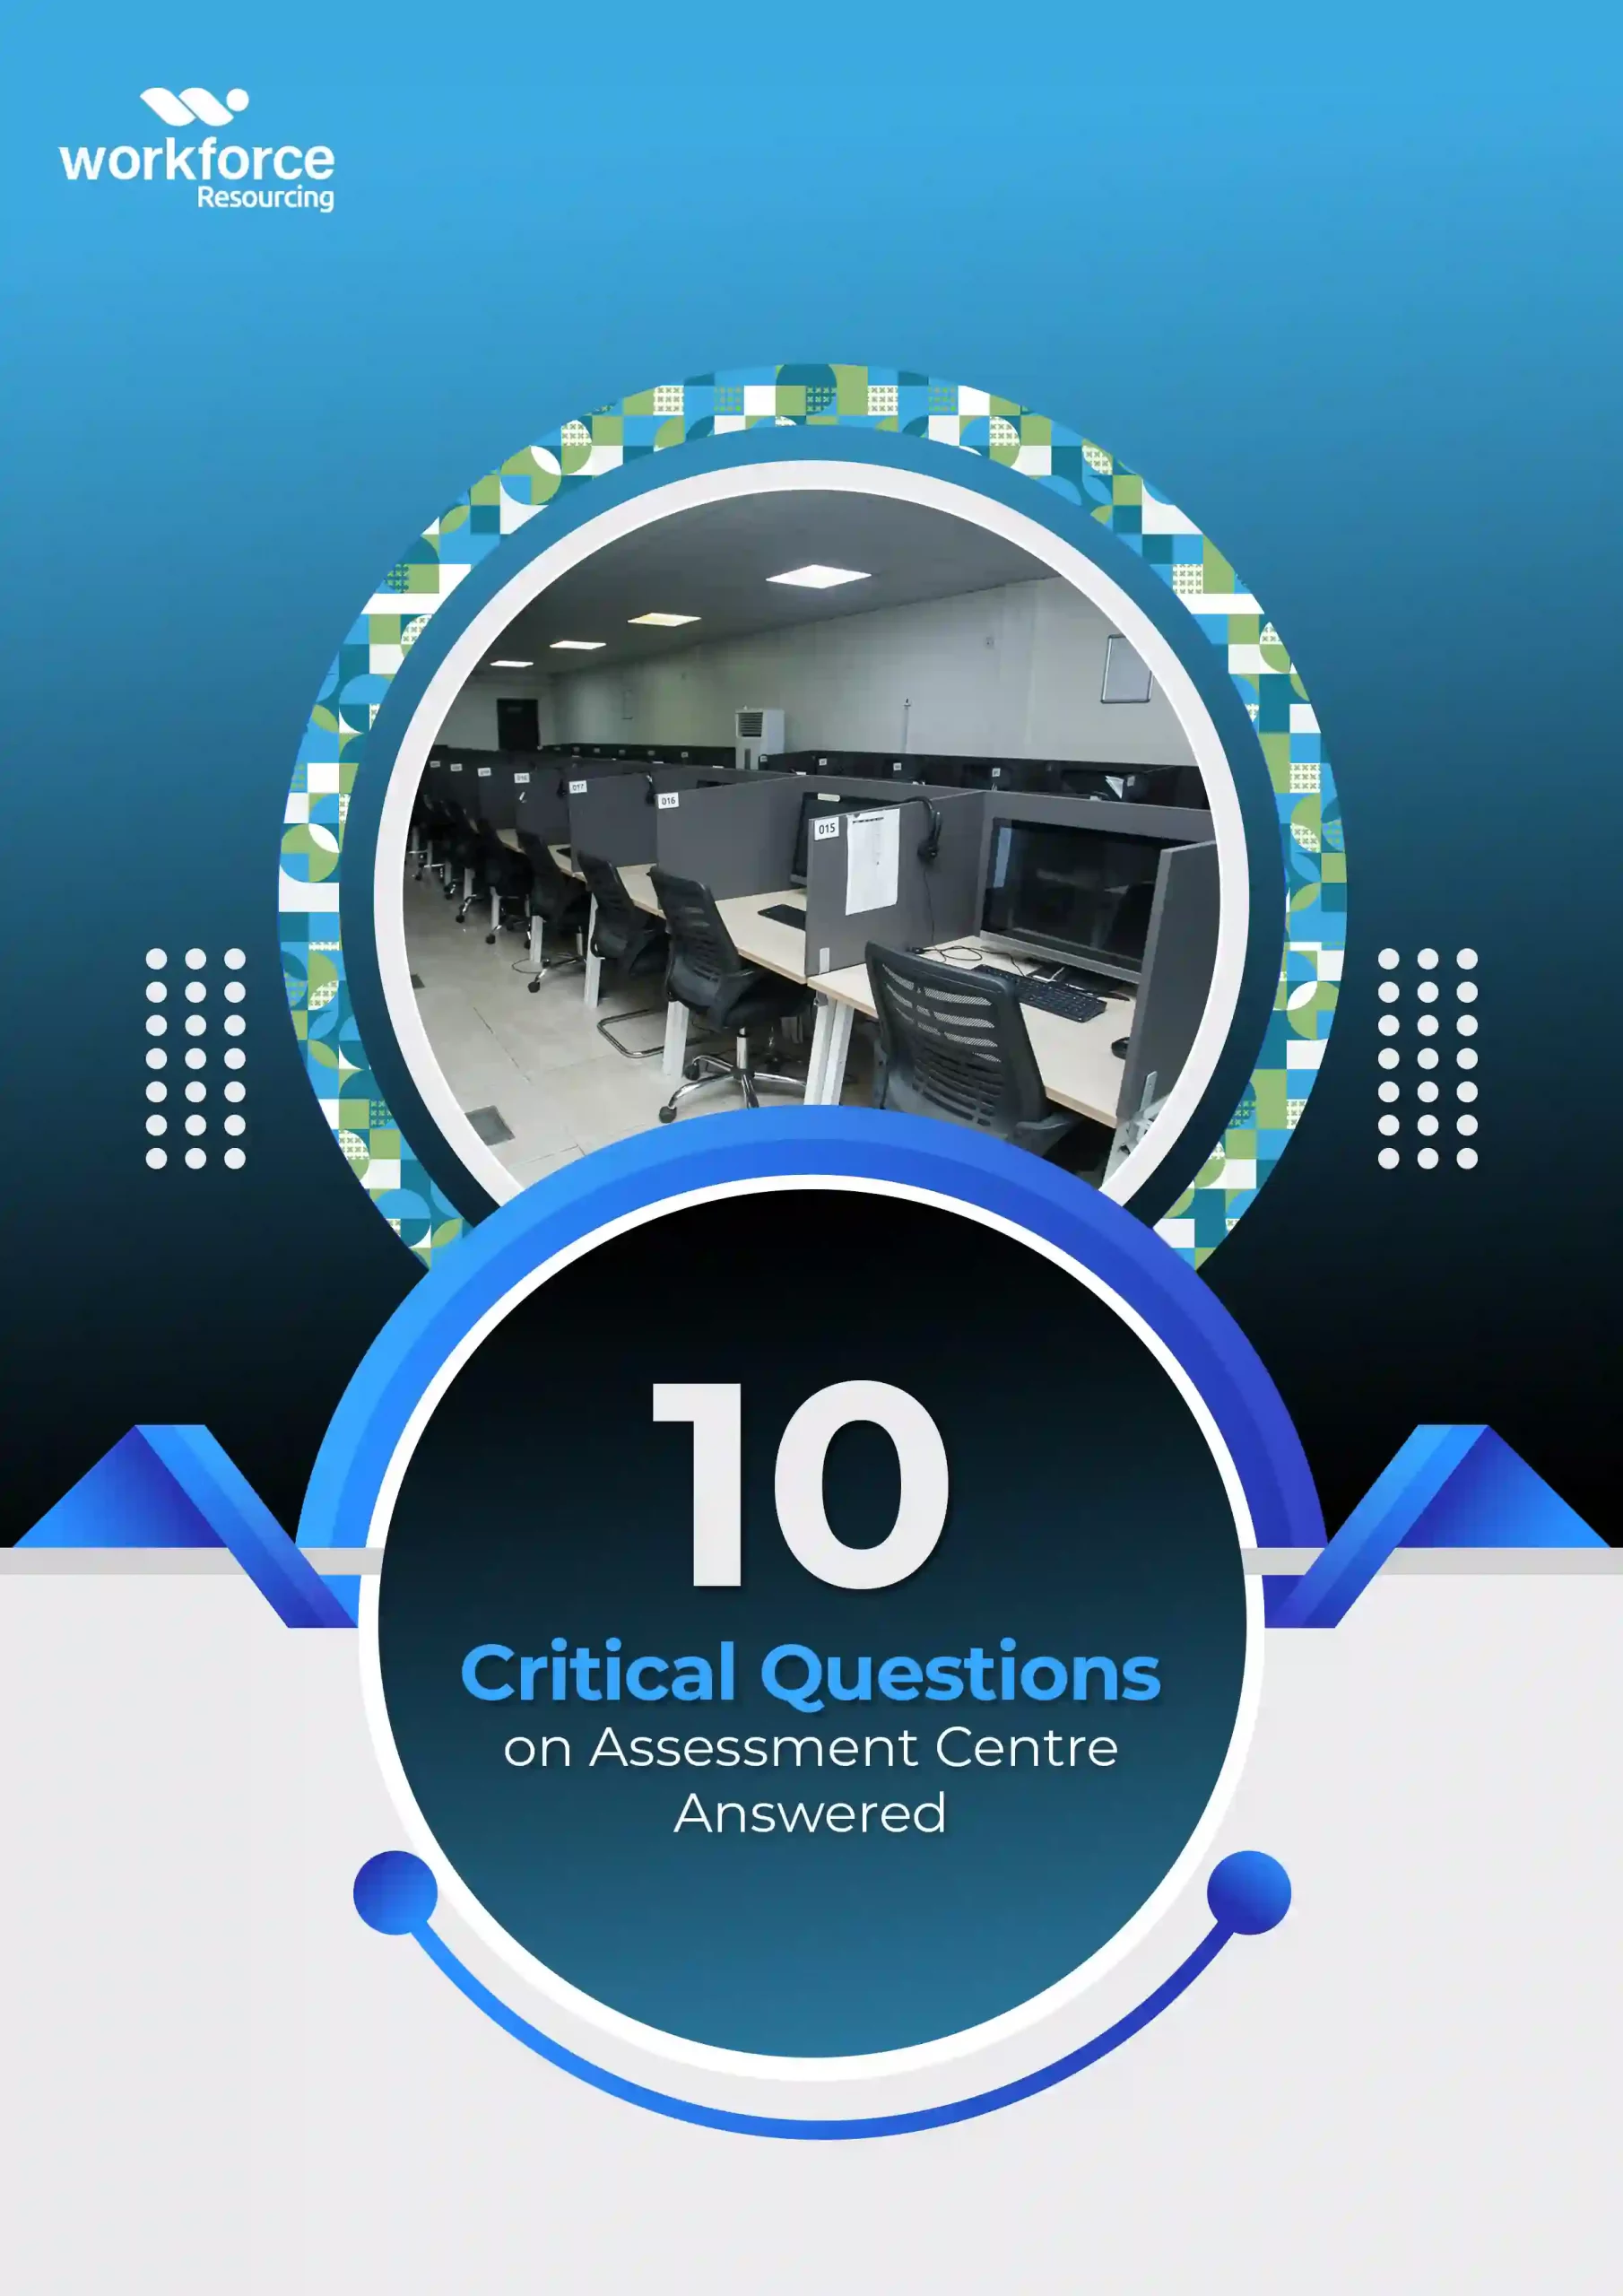 10 Critical Questions on Assessment Centre Answered